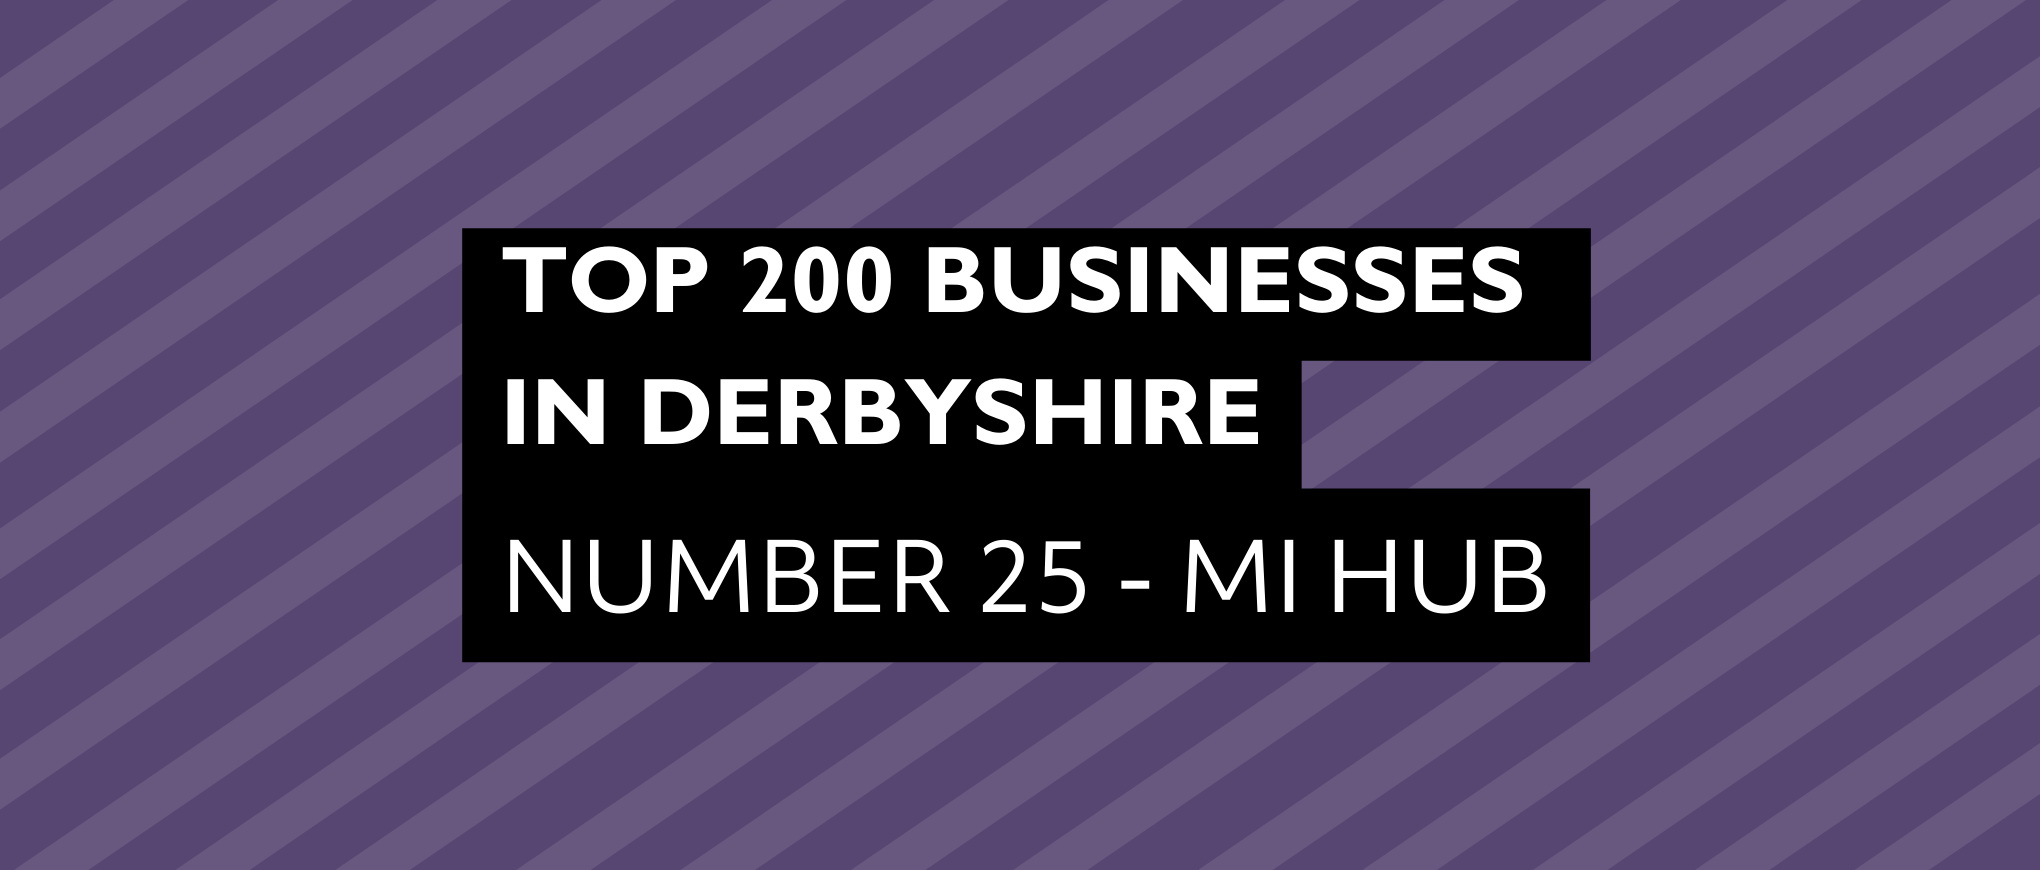 Text that reads Top 200 businesses in Derbyshire number 25 - Mi Hub